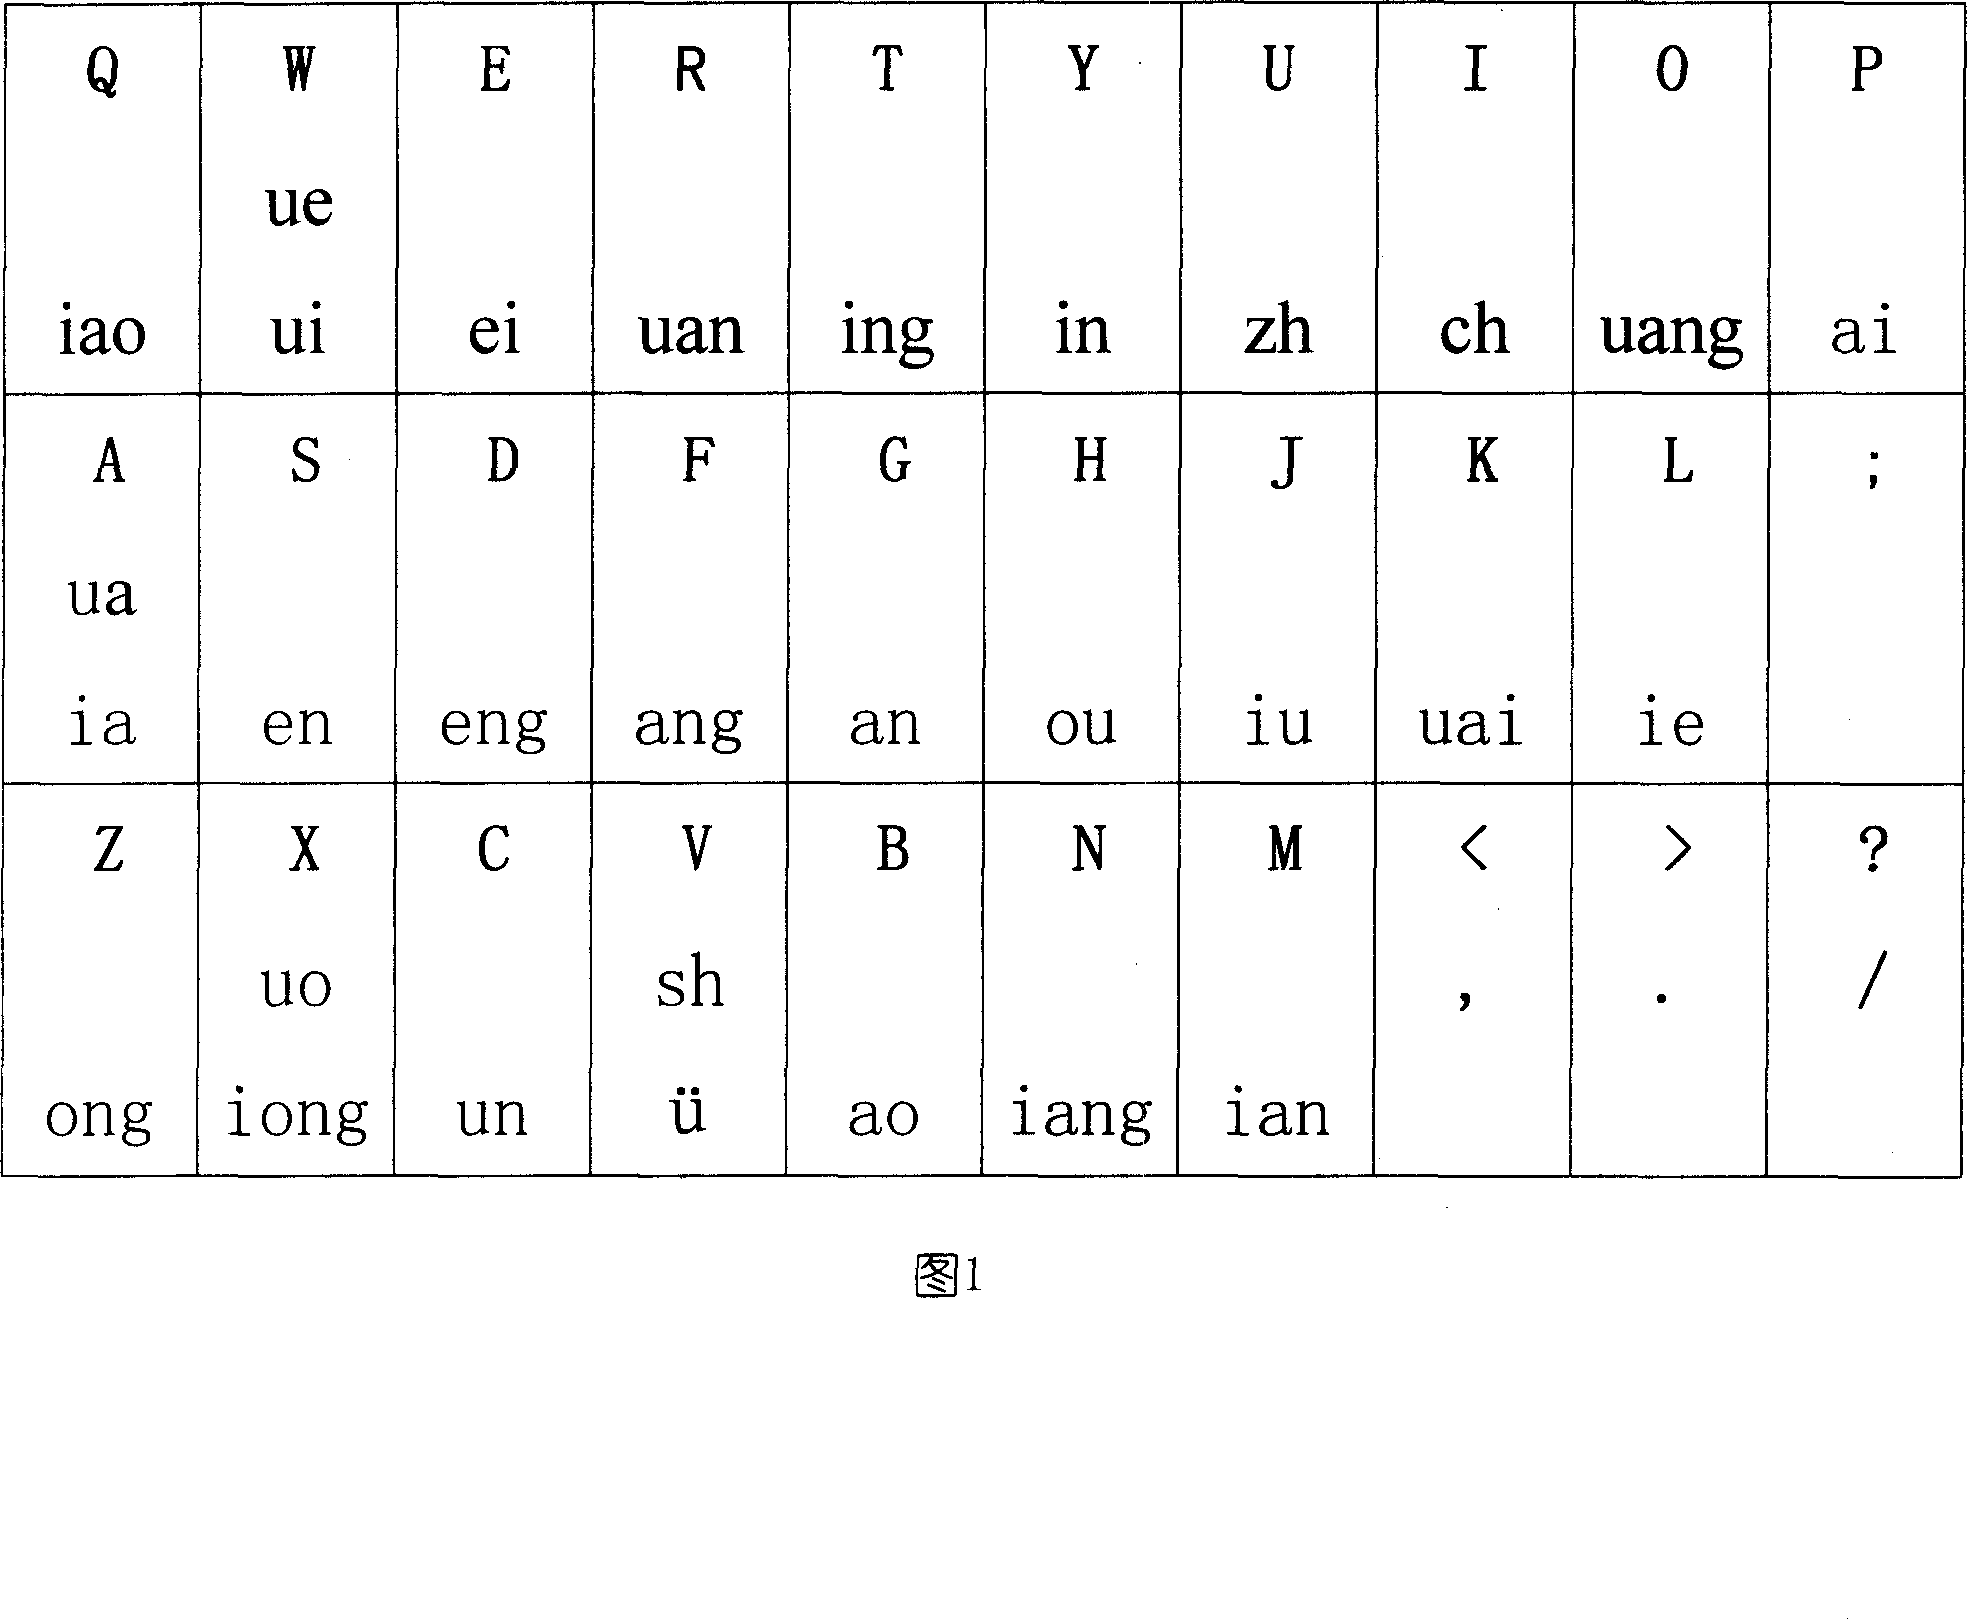 Computer Chinese character encoding method for sound and shape blind input and its keyboard